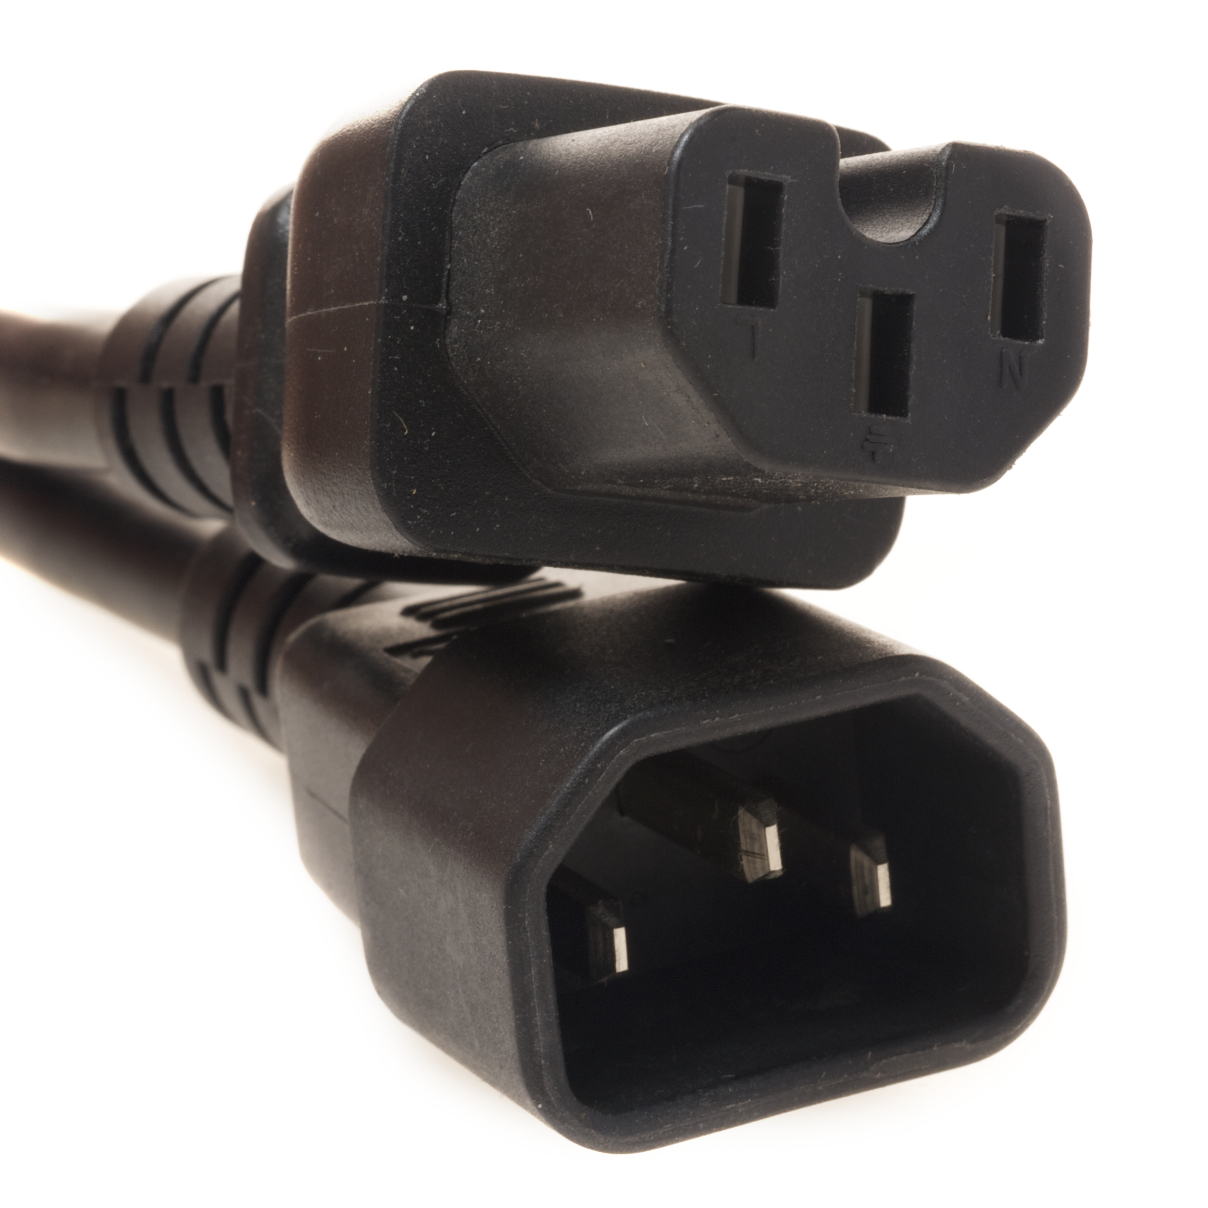 15 Amp C14 to C15 PDU Power Cords | Cables.com